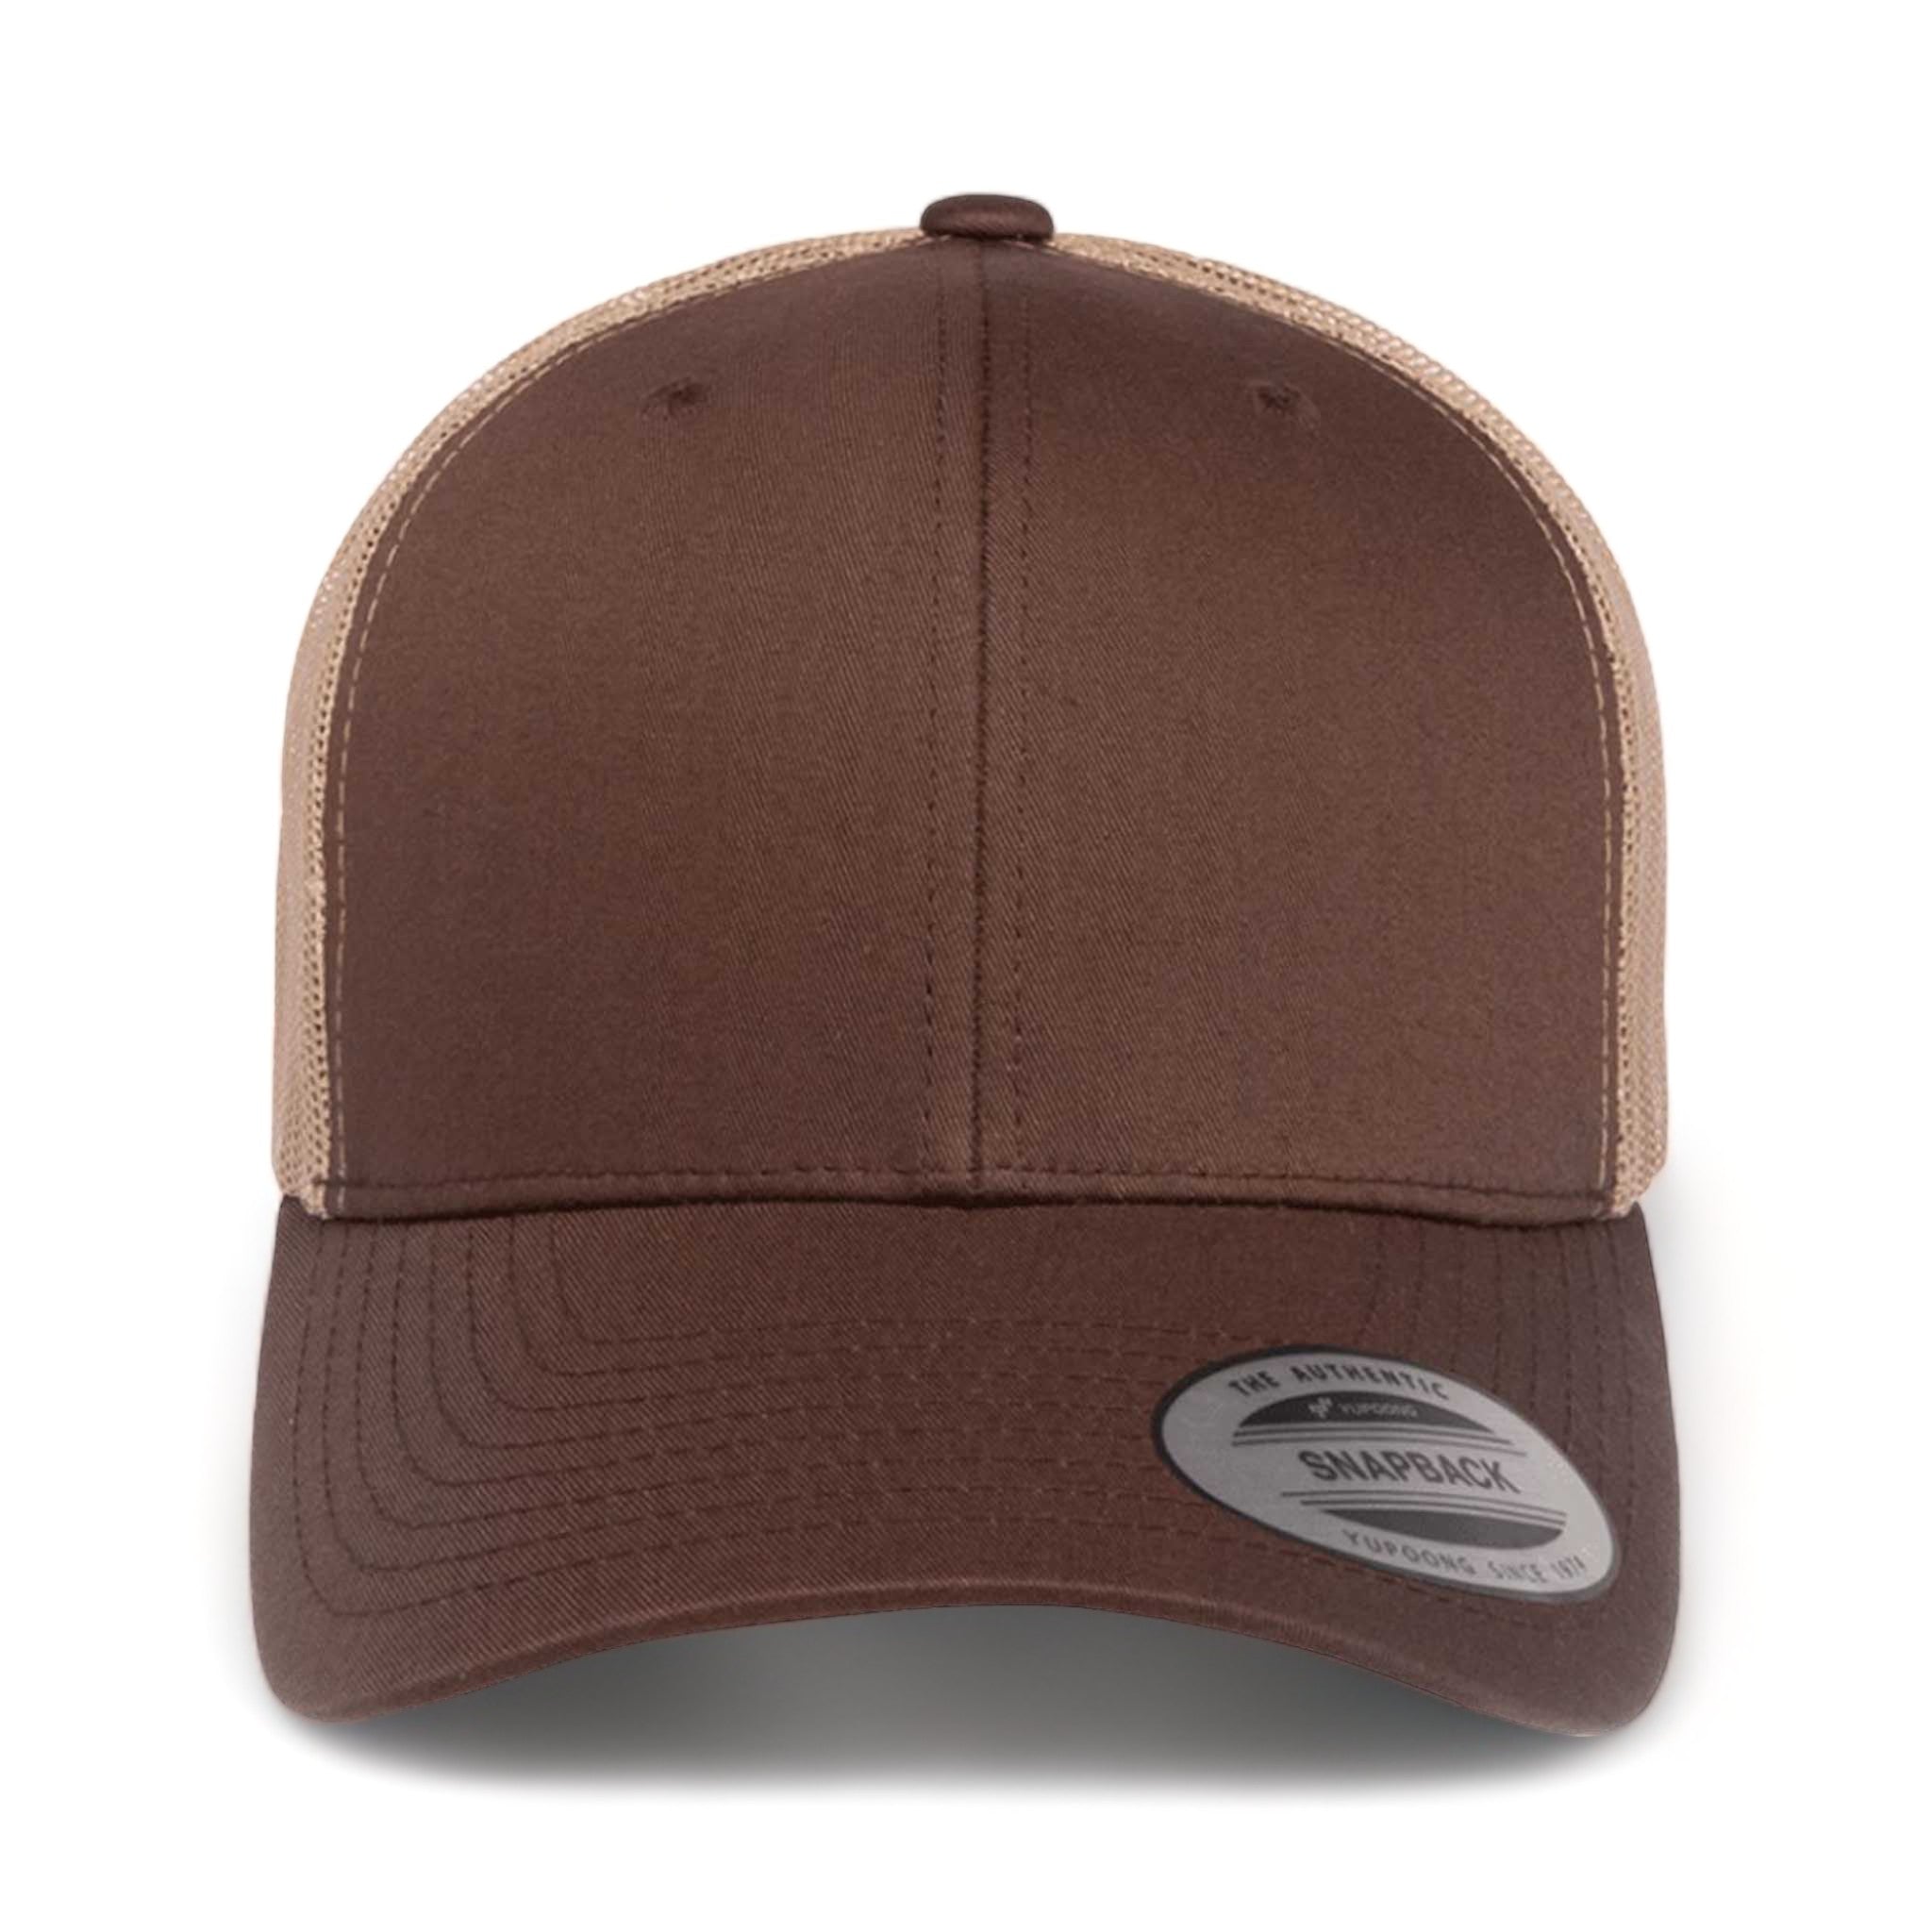 Front view of YP Classics 6606 custom hat in brown and khaki